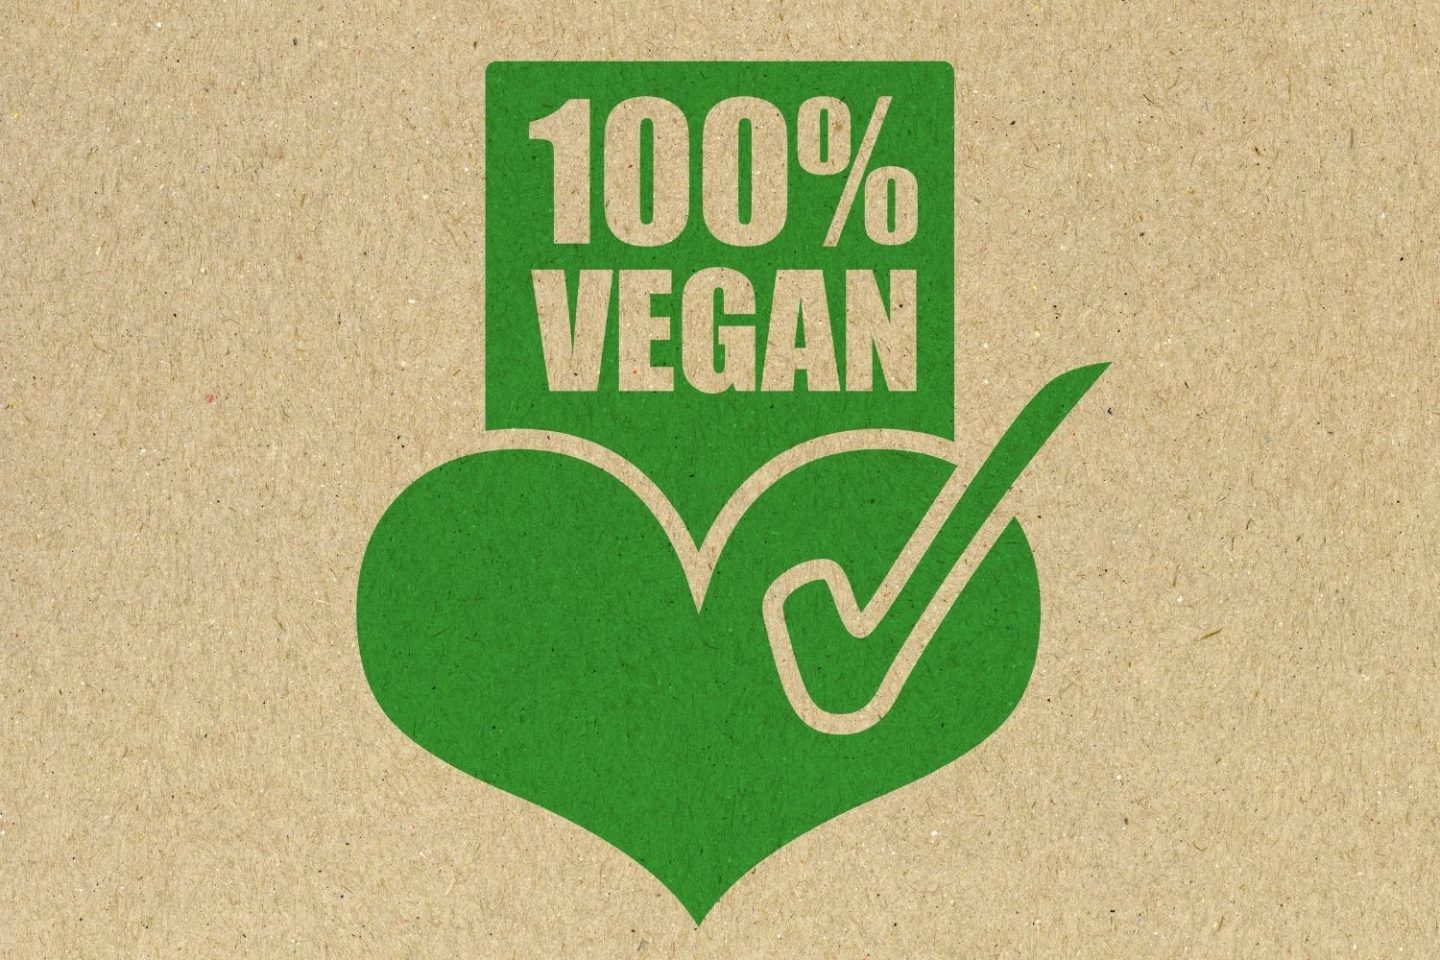 A photo of a cardboard background with a fully green icon design showing a heart with a tick through it and '100% vegan' above it.